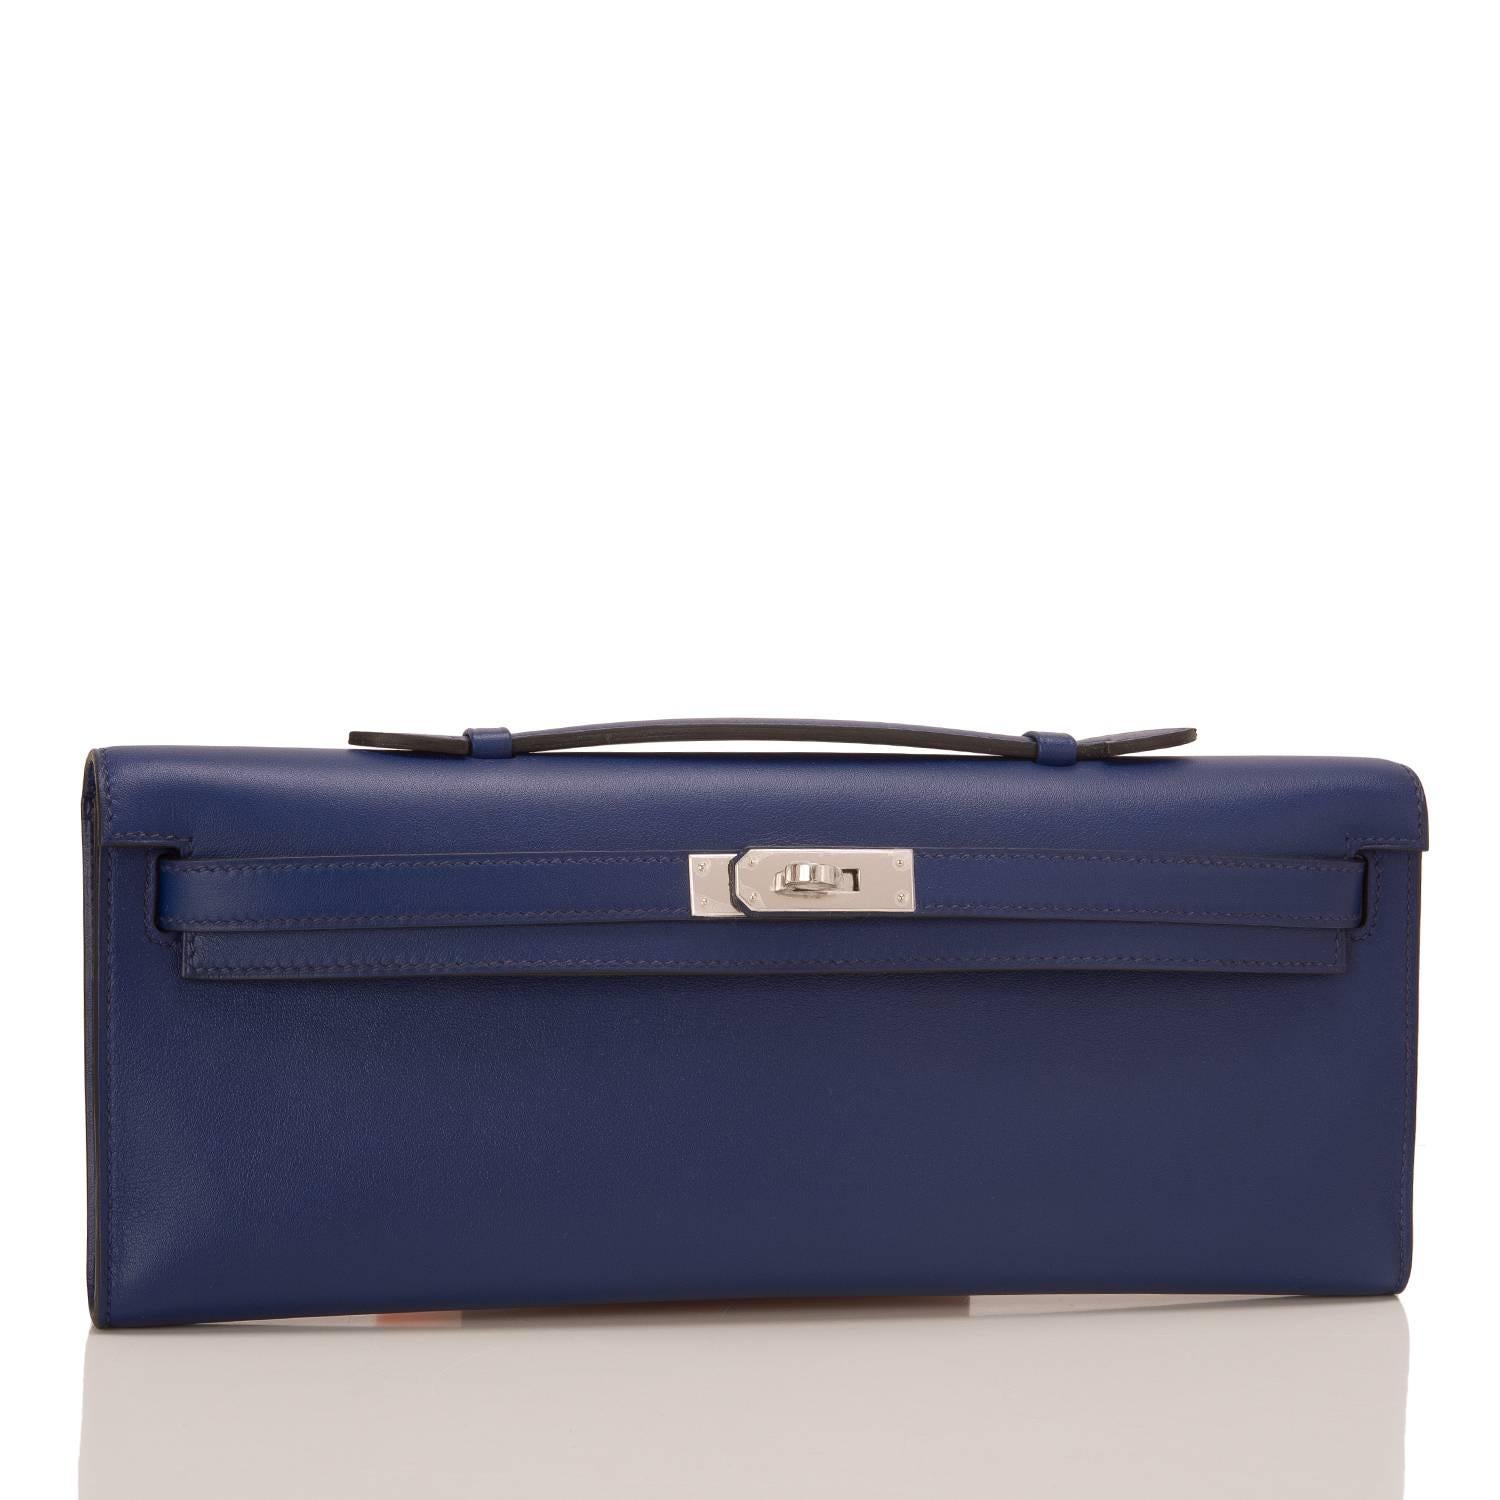 Hermes Blue Sapphire (Bleu Saphir) Kelly Cut clutch in swift leather with palladium hardware.
This bag has tonal stitching, palladium hardware, front straps with toggle closure and a flat handle.

The interior is lined in Blue Sapphire chevre and